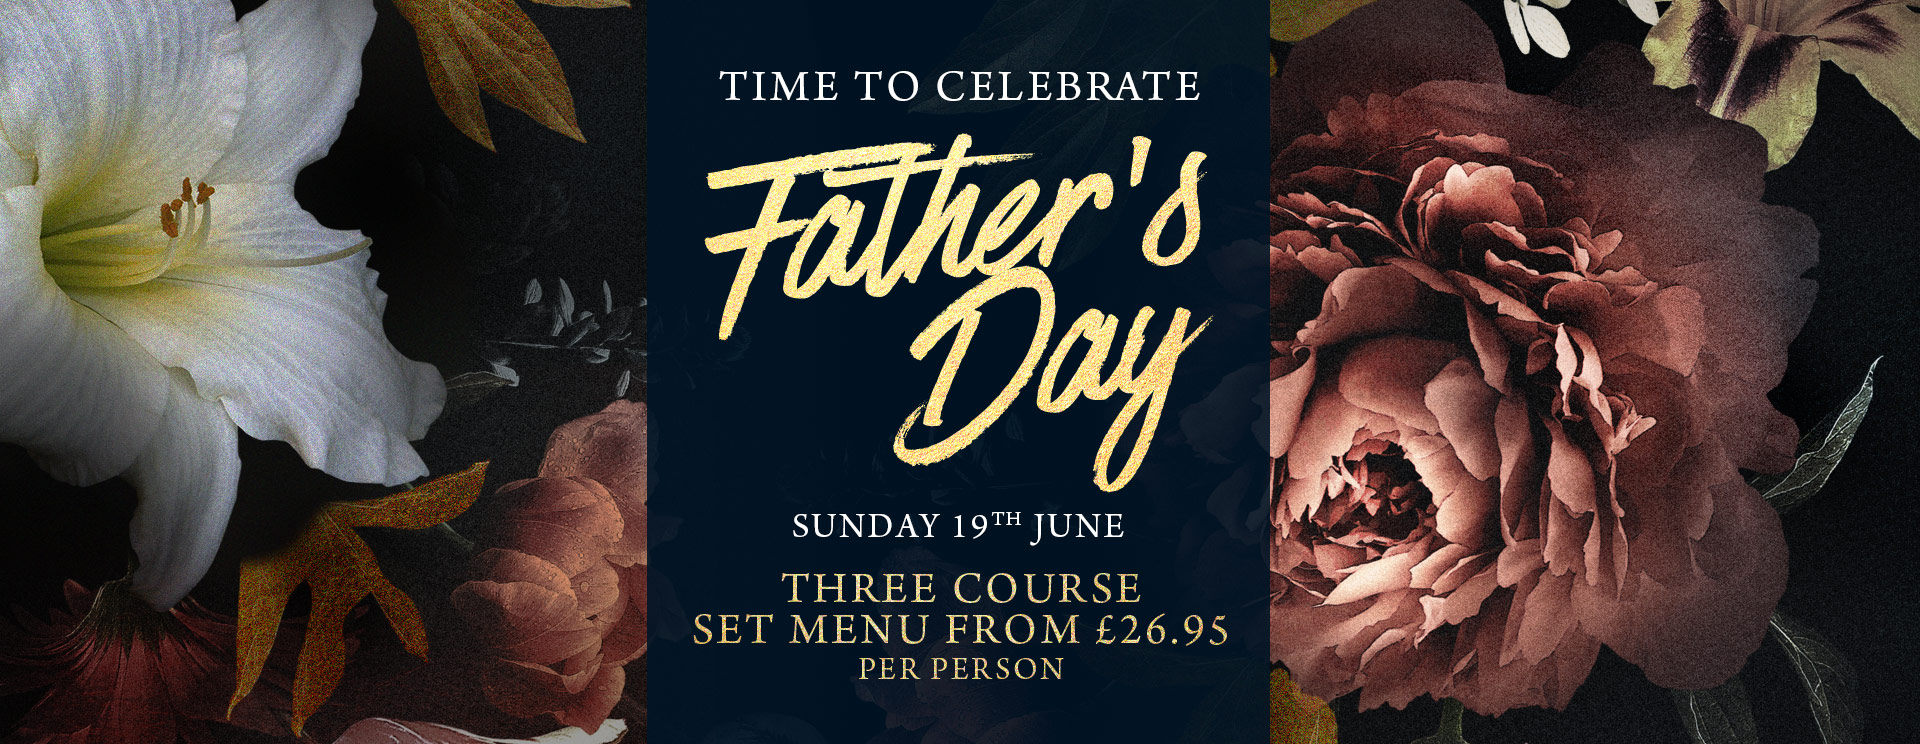 Fathers Day at The Arkley